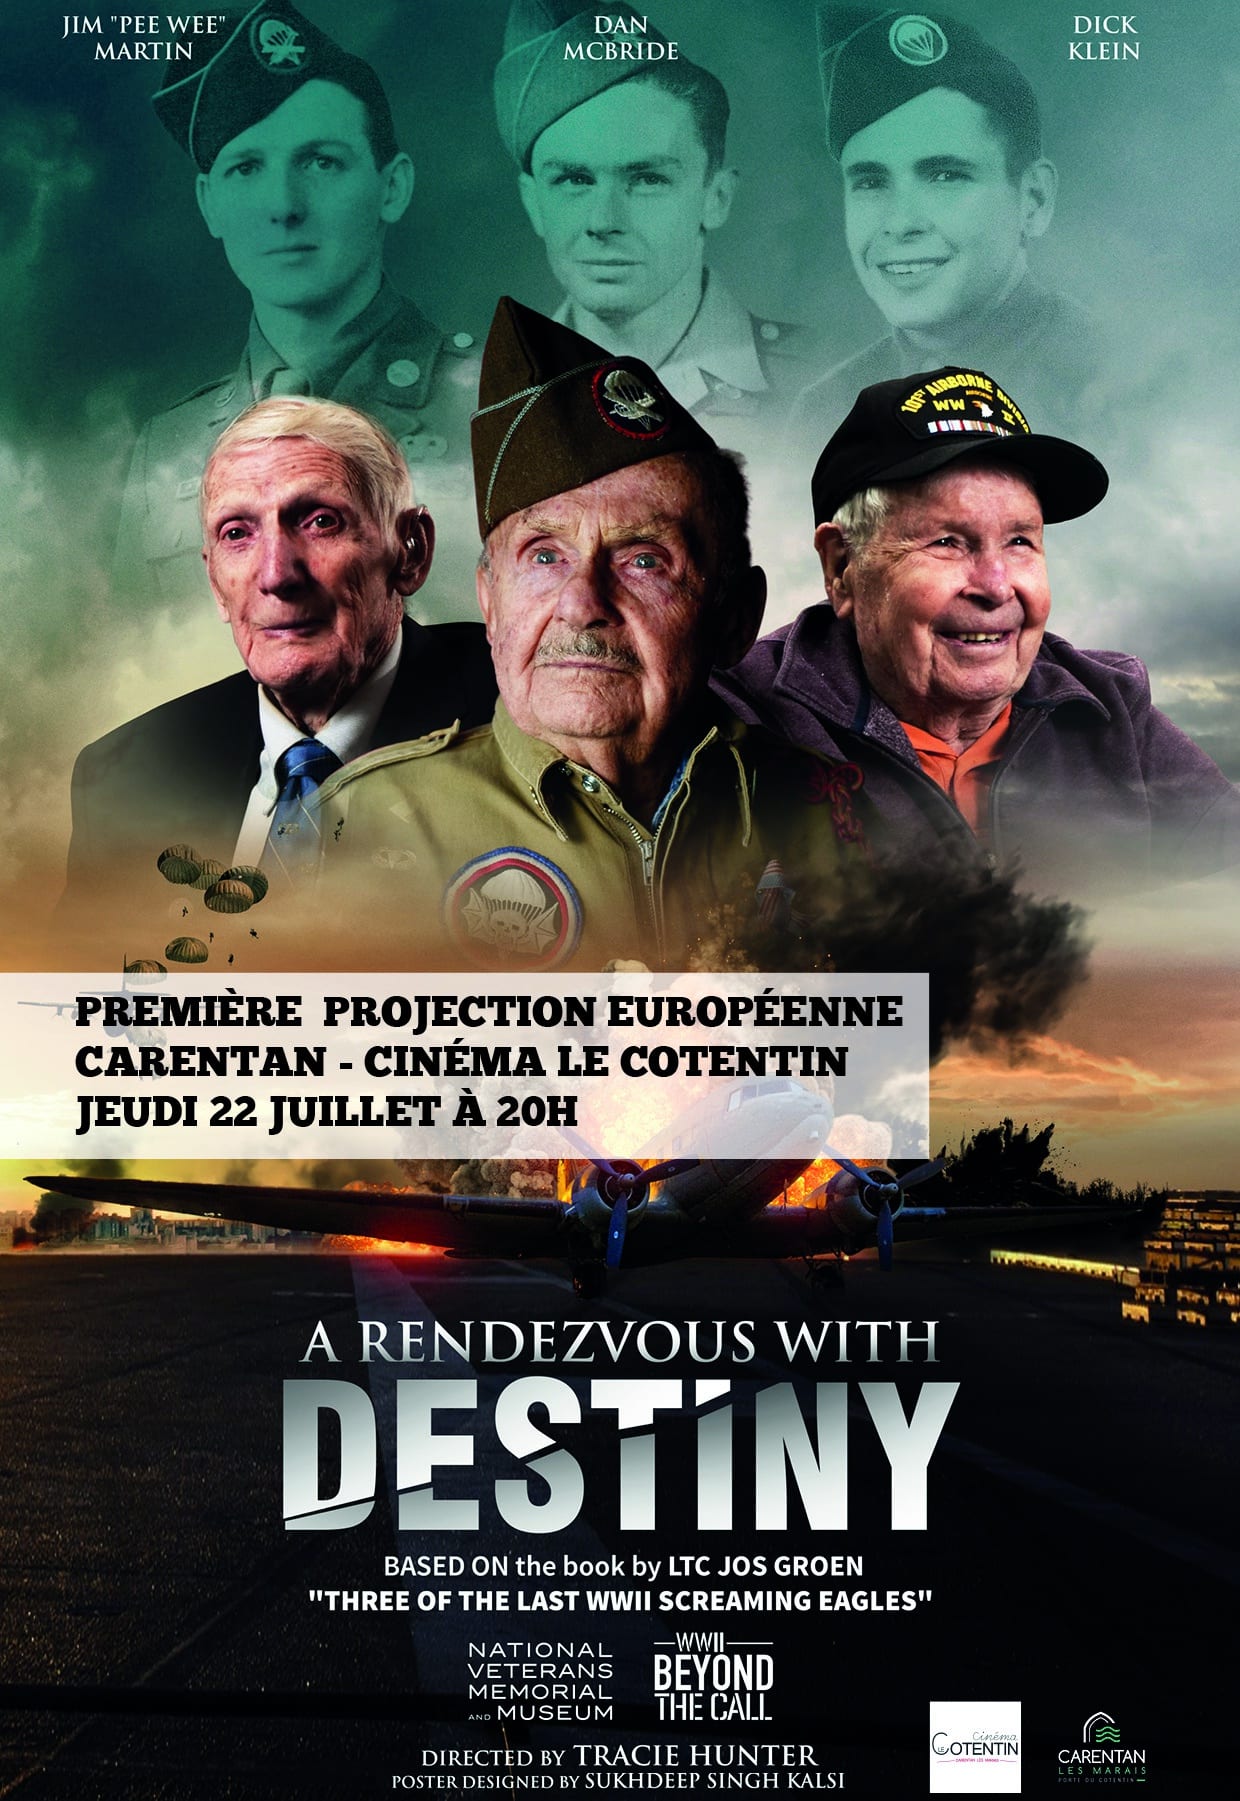 Image de A Rendezvous with destiny - Documentary - July 22, 8PM at the Movie Theater of Carentan